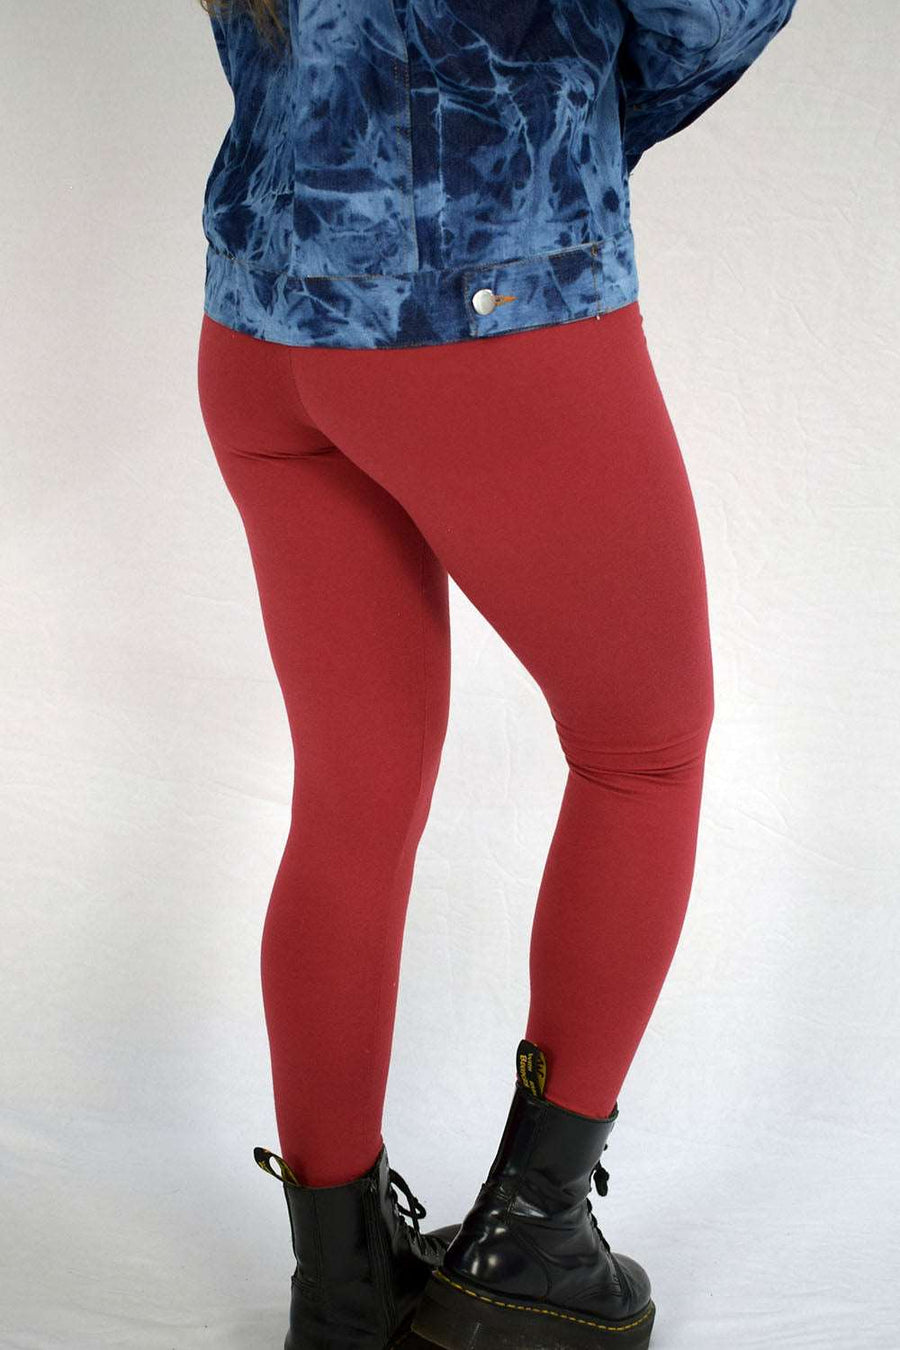 Womens Leggings High Waisted for Gym in Red!